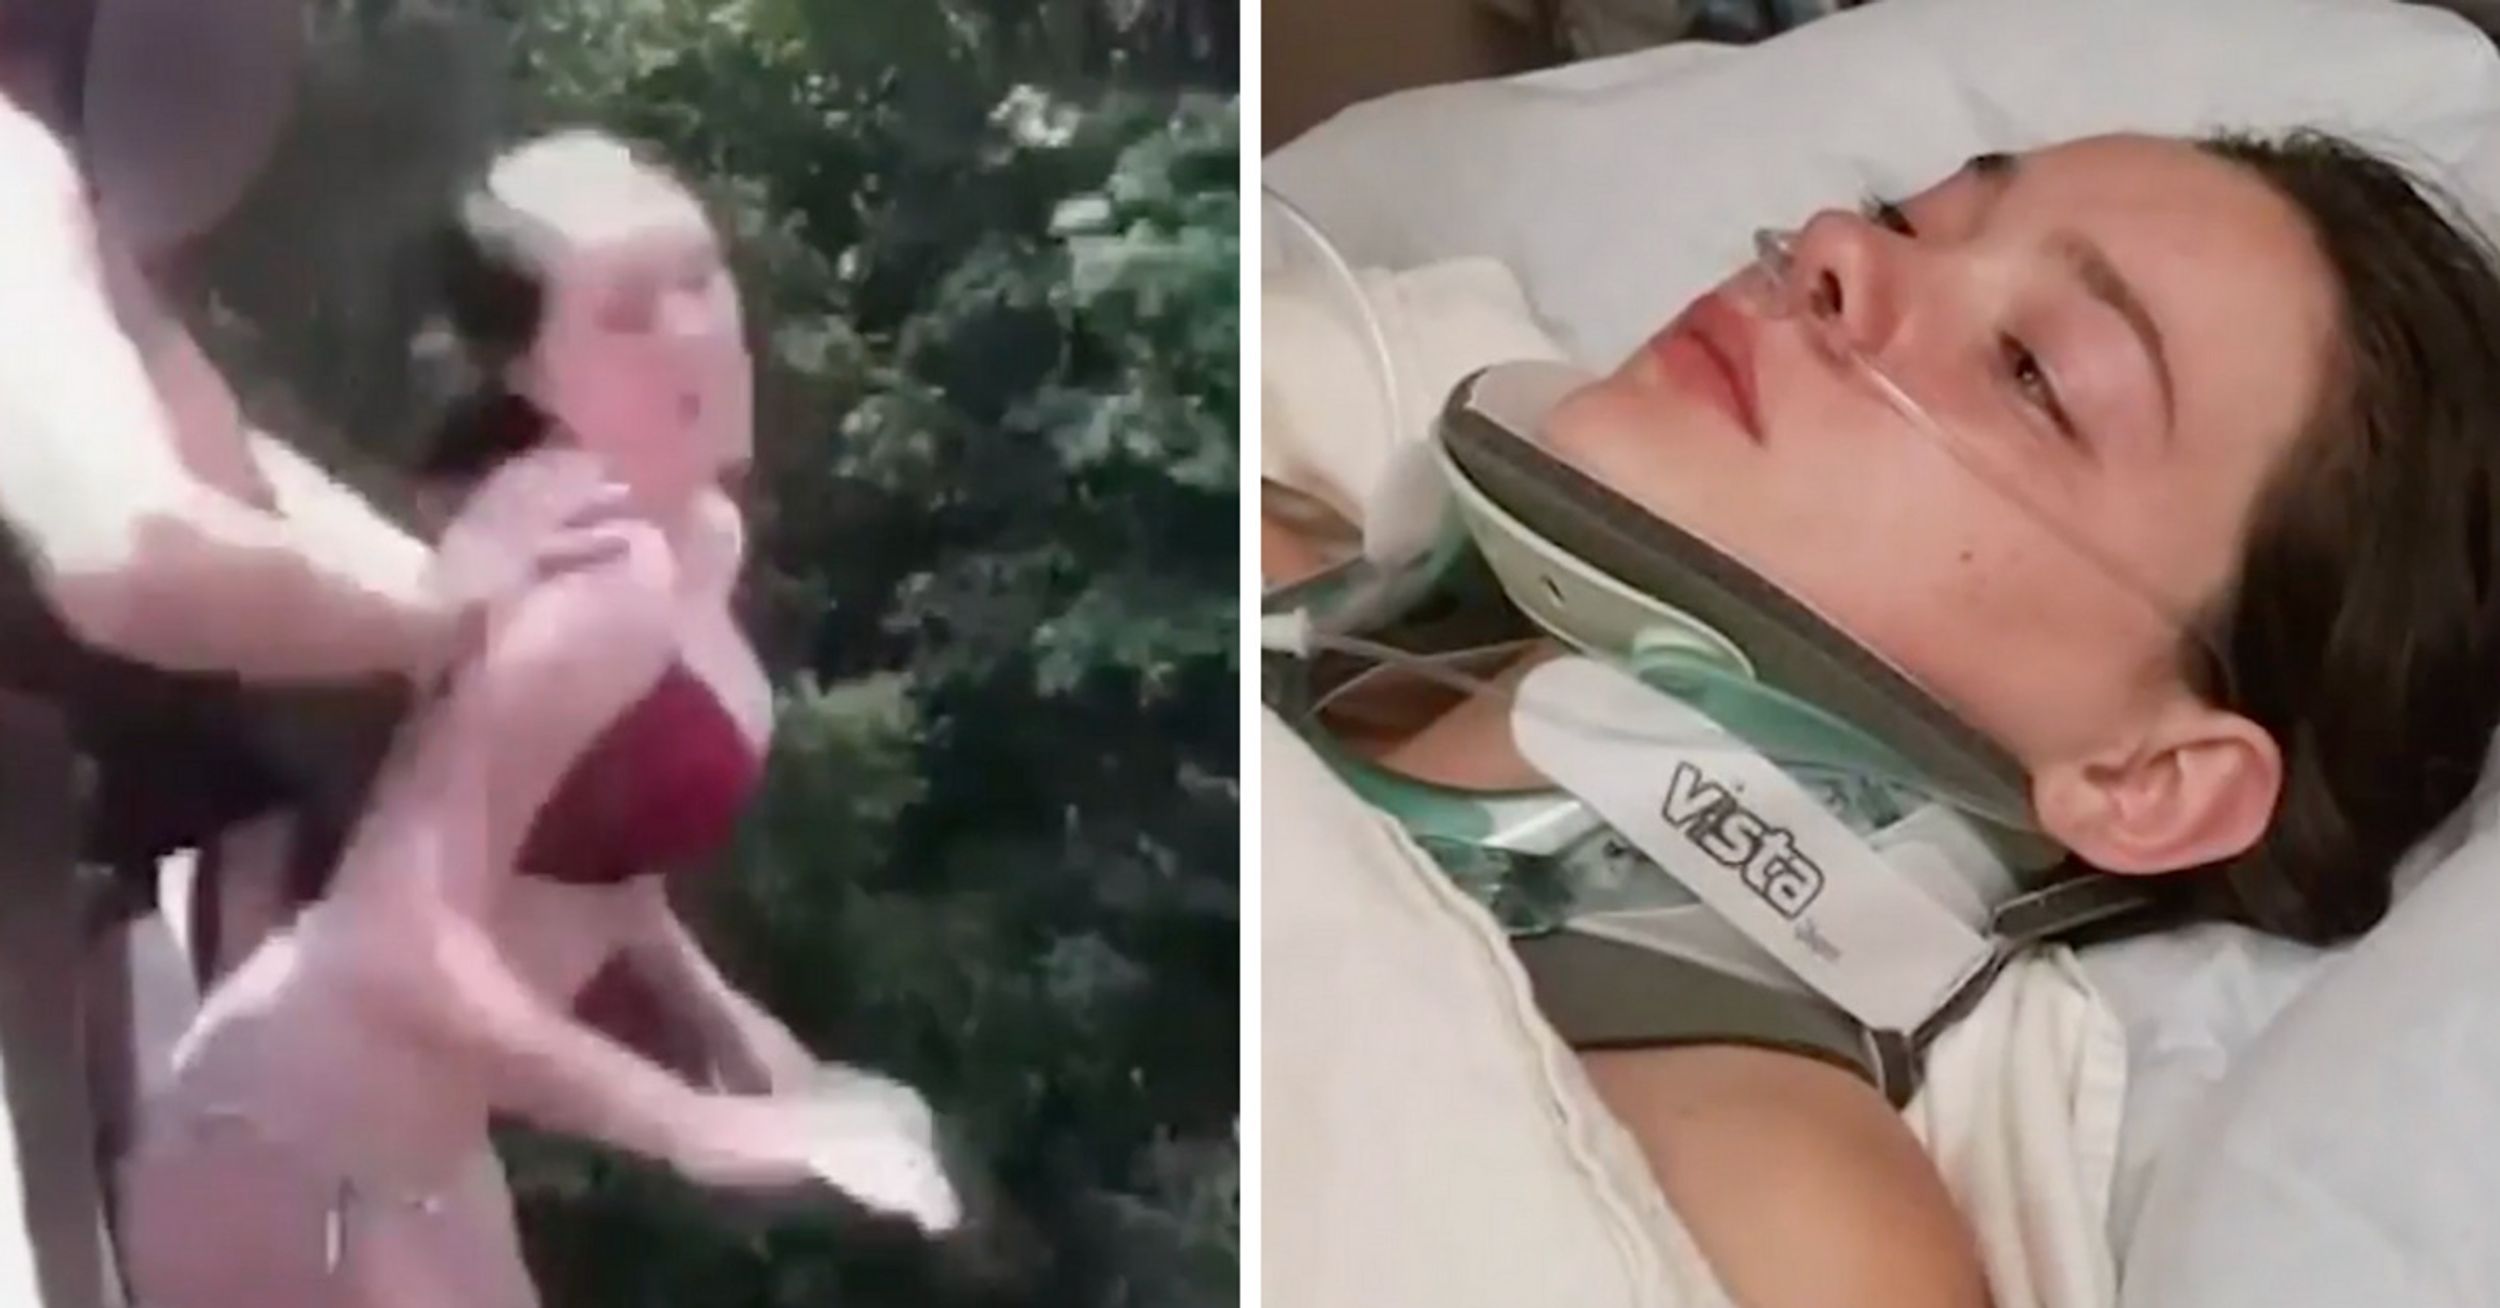 16-Year-Old Girl 'Lucky To Be Alive' After Friend Pushes Her Off Bridge